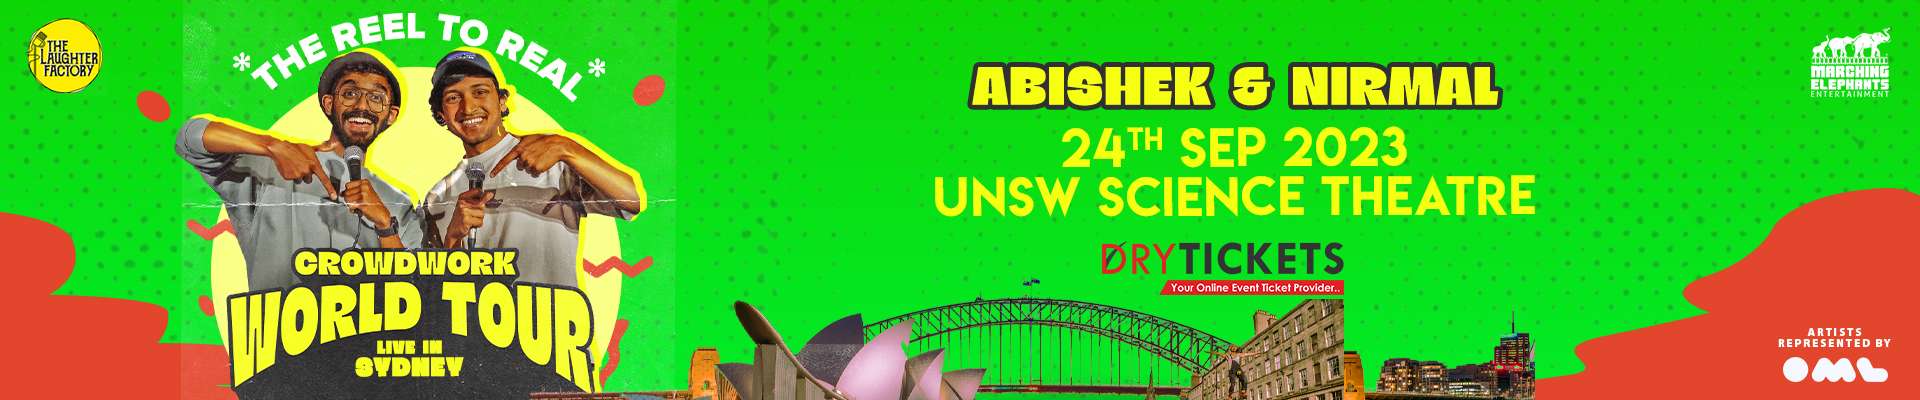 Abishek & Nirmal - The Reel to Real Crowdwork Tour - Live In Sydney